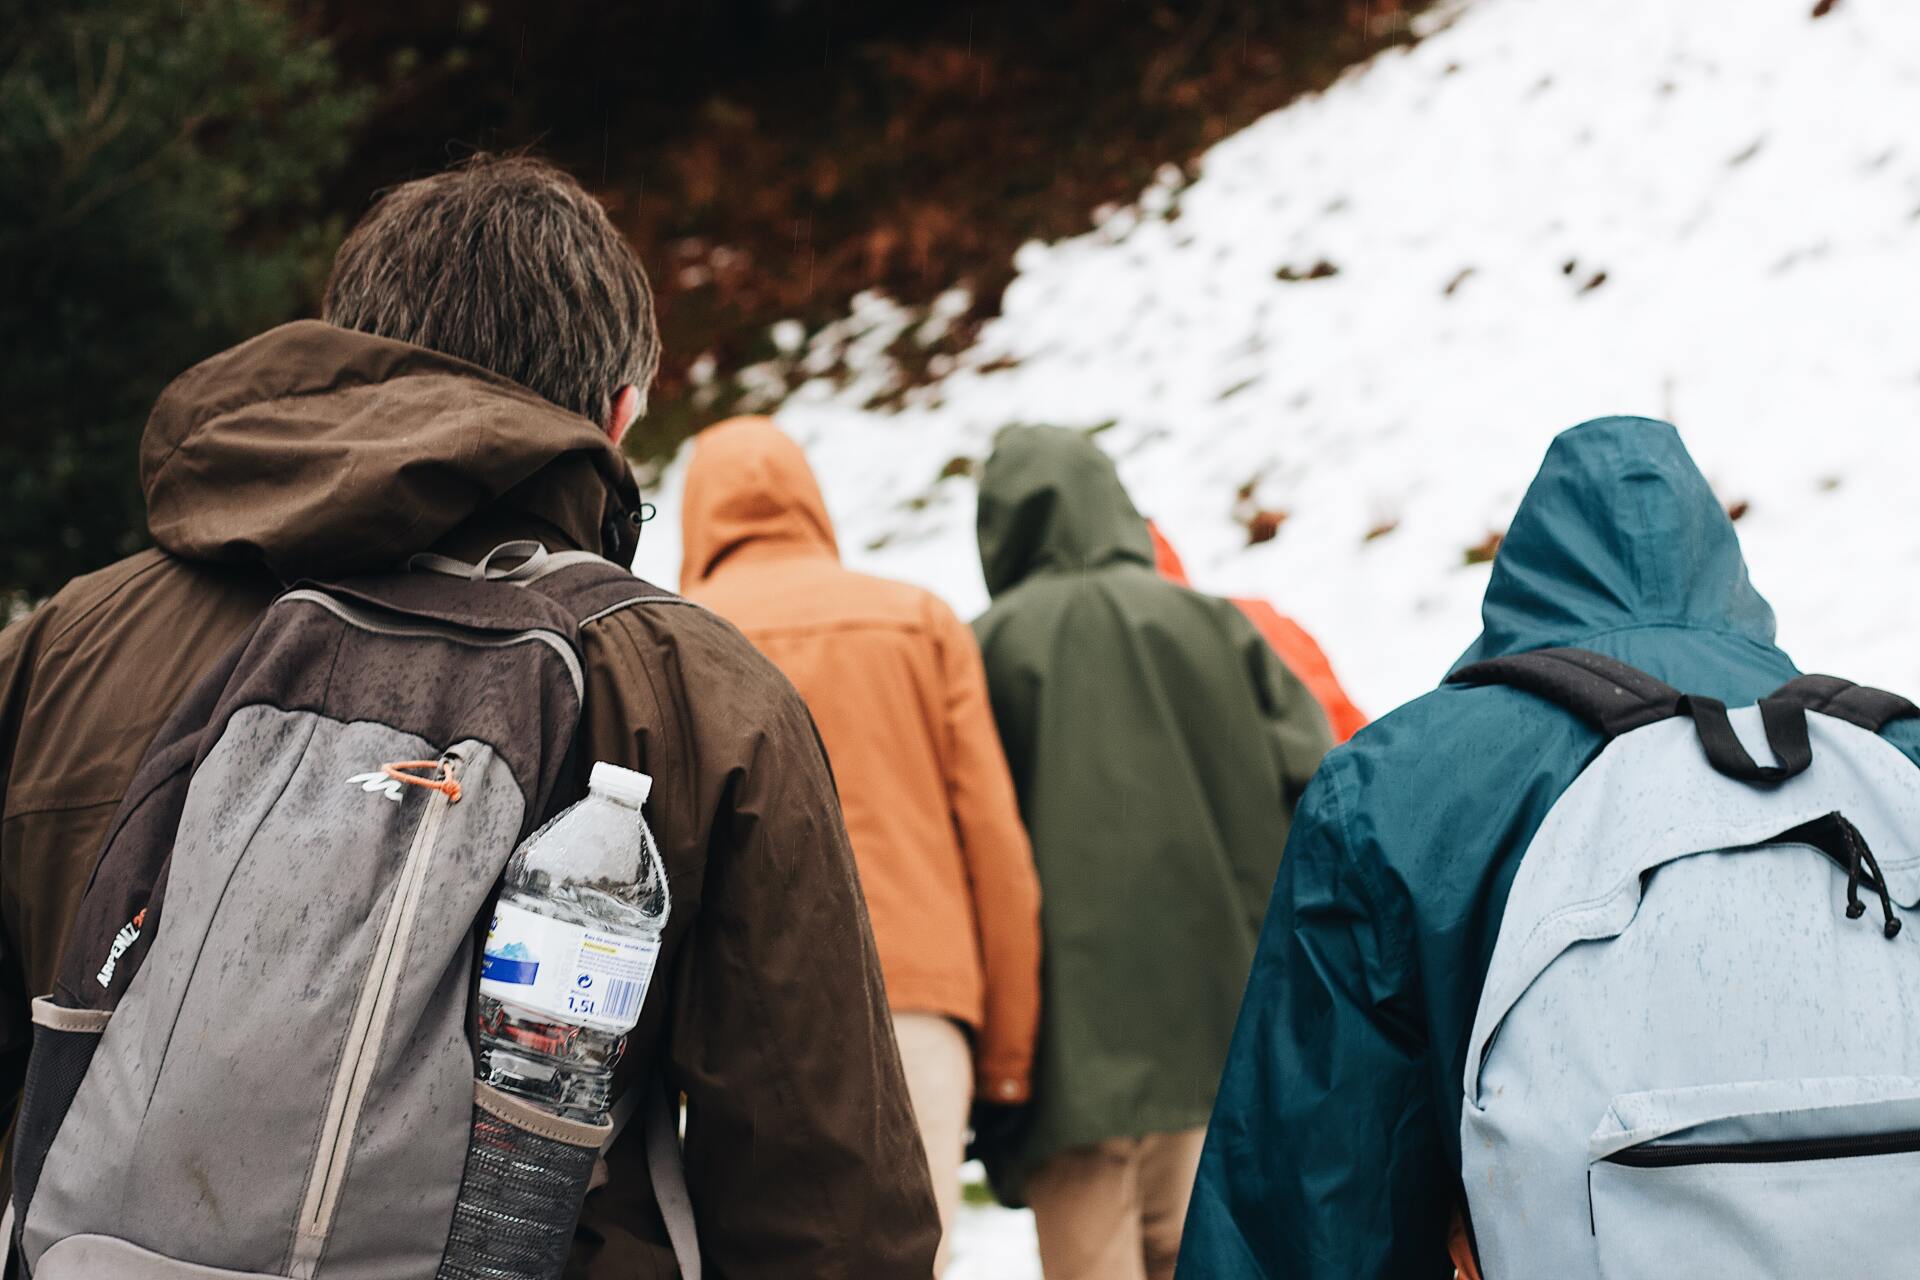 Group of hikers with water bottles in their packs